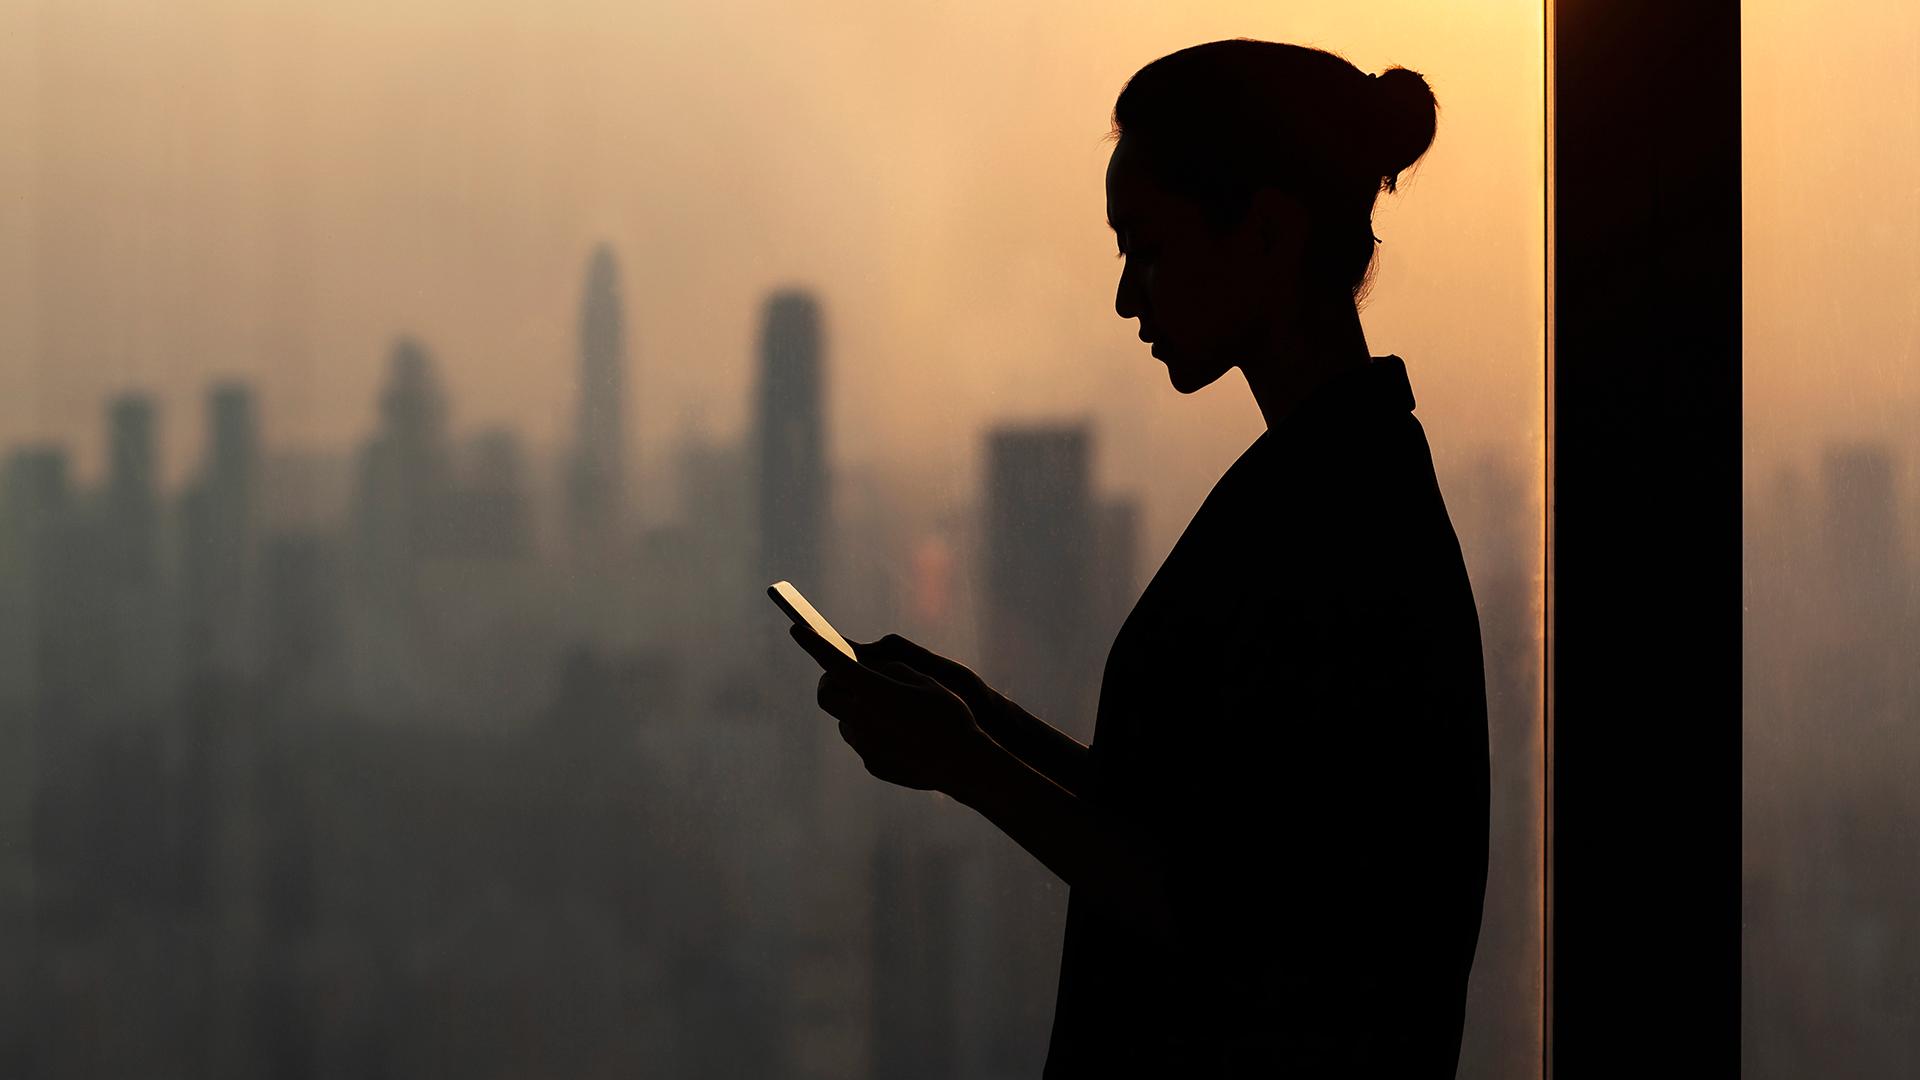 Silhouette of young woman using smartphone next to window with cityscape - stock photo